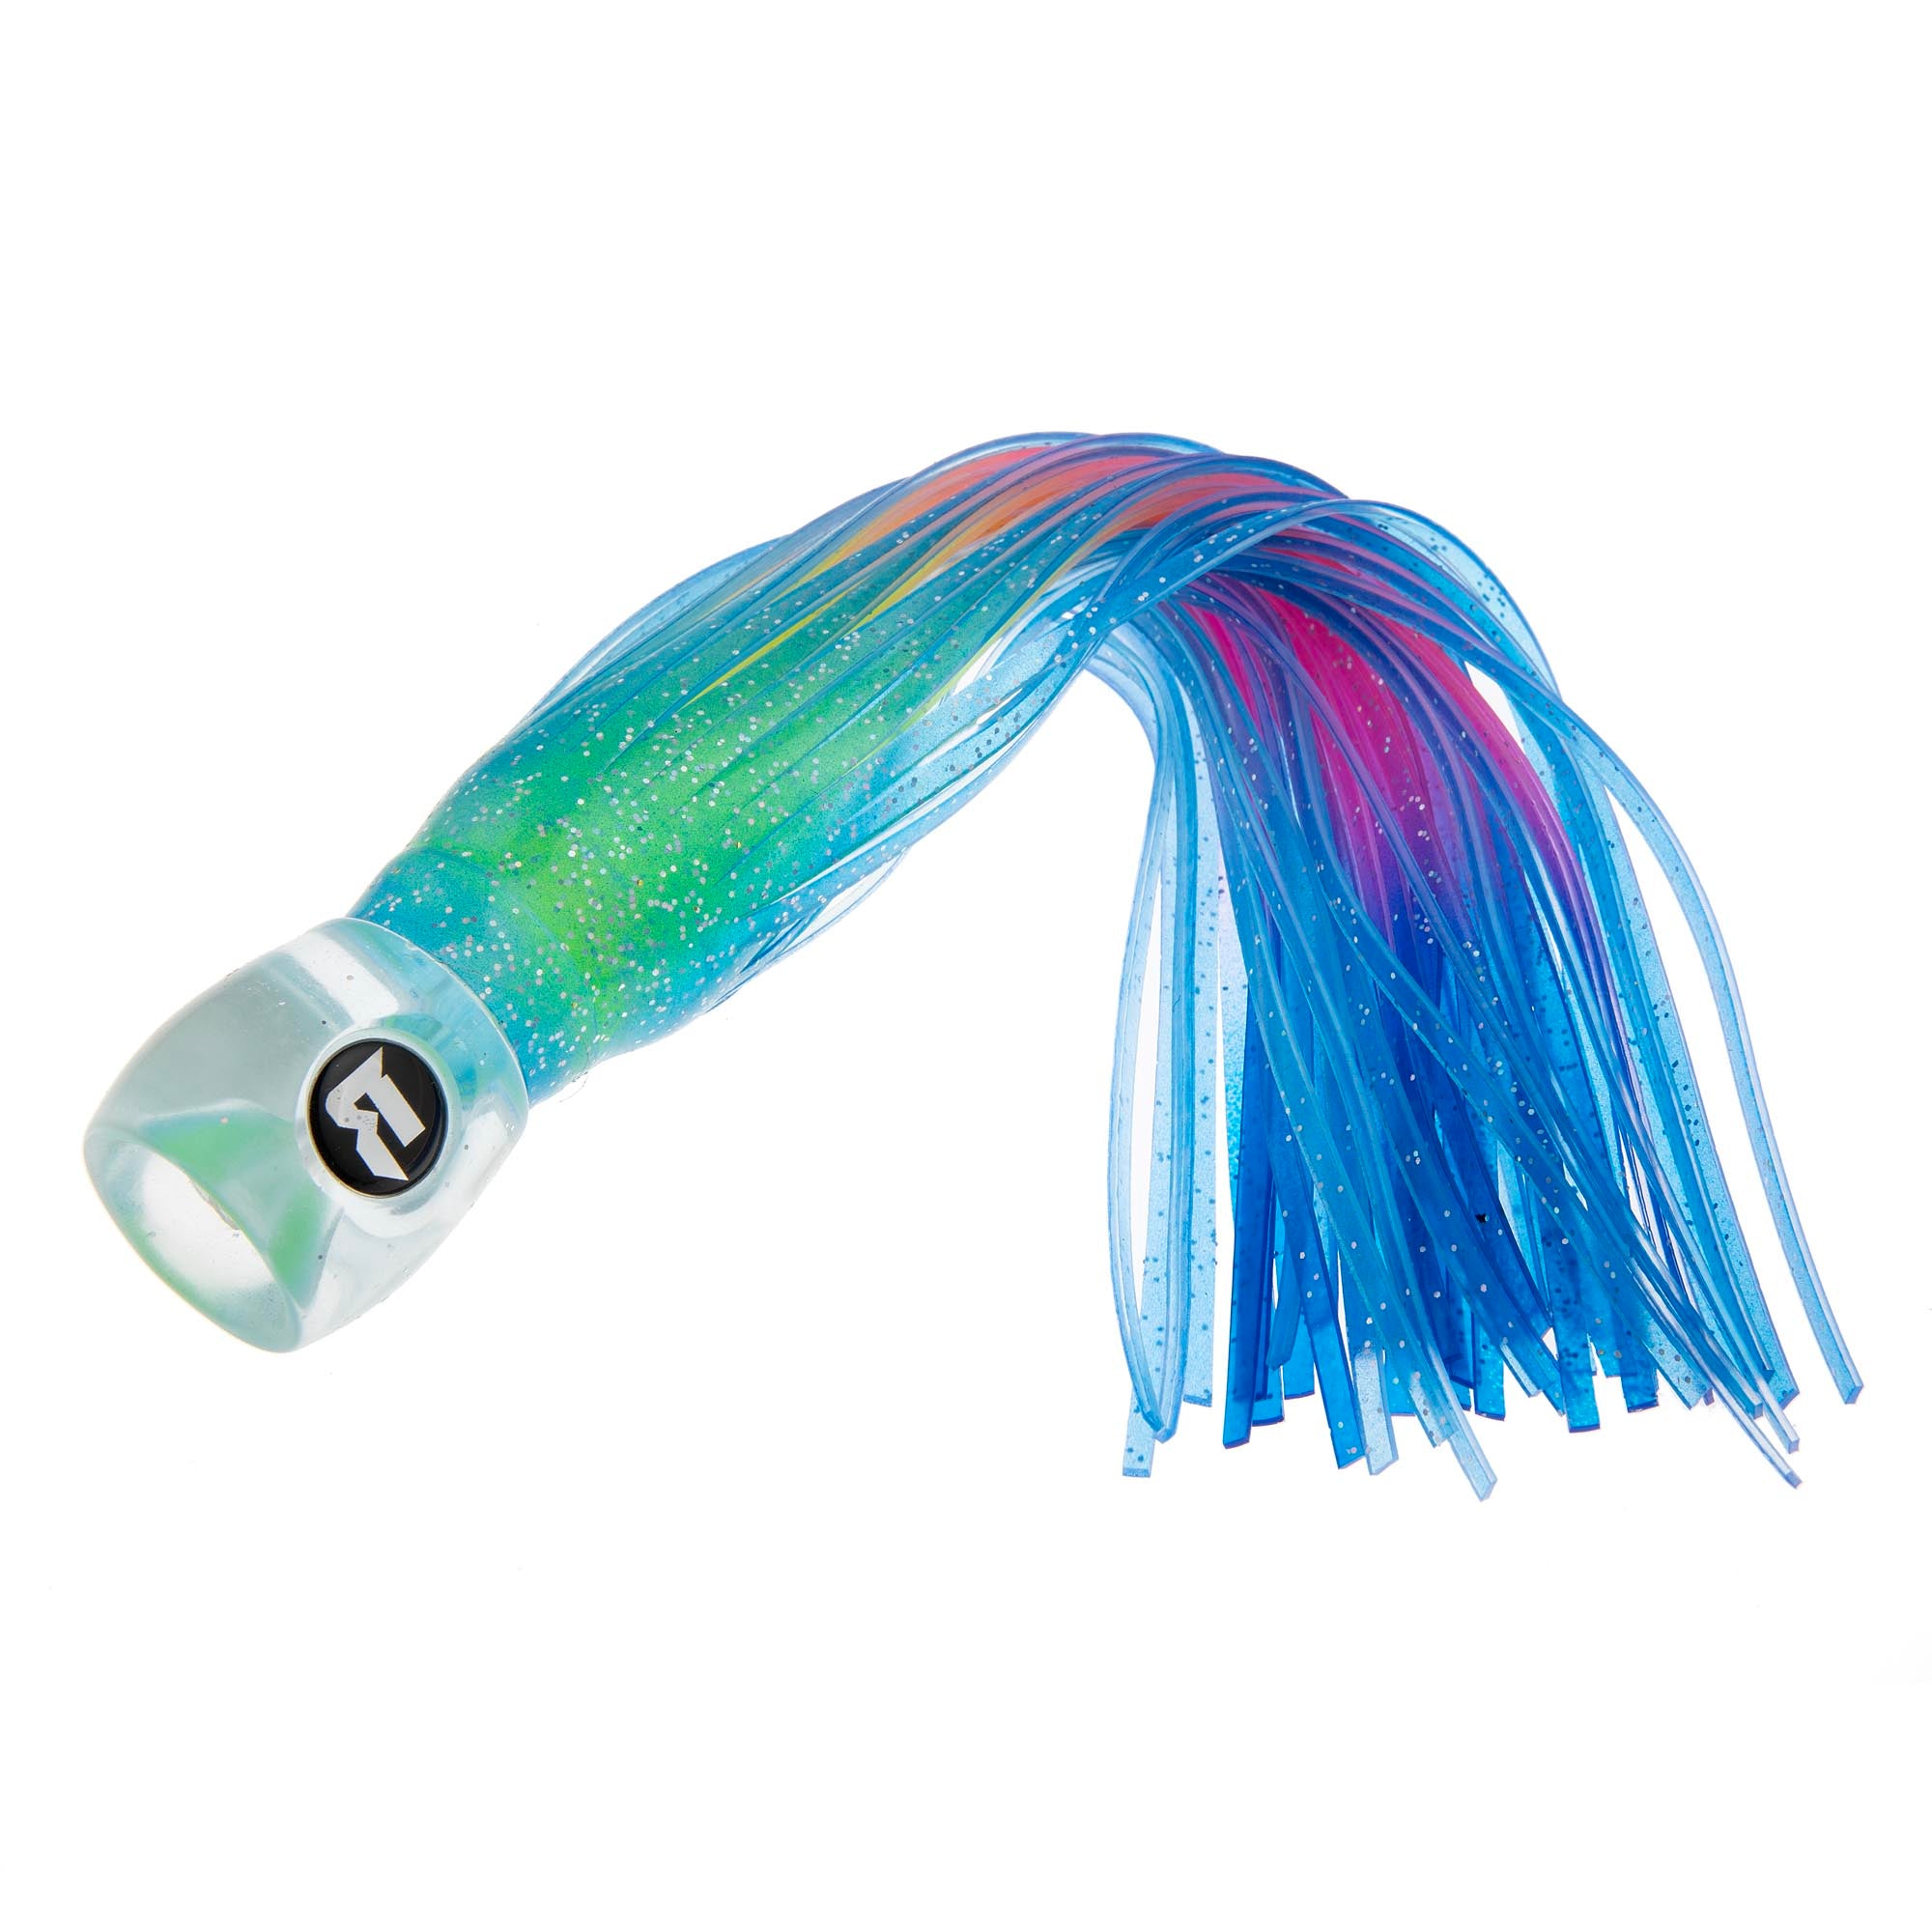 The Soft Oscar Lure - Richter Lures